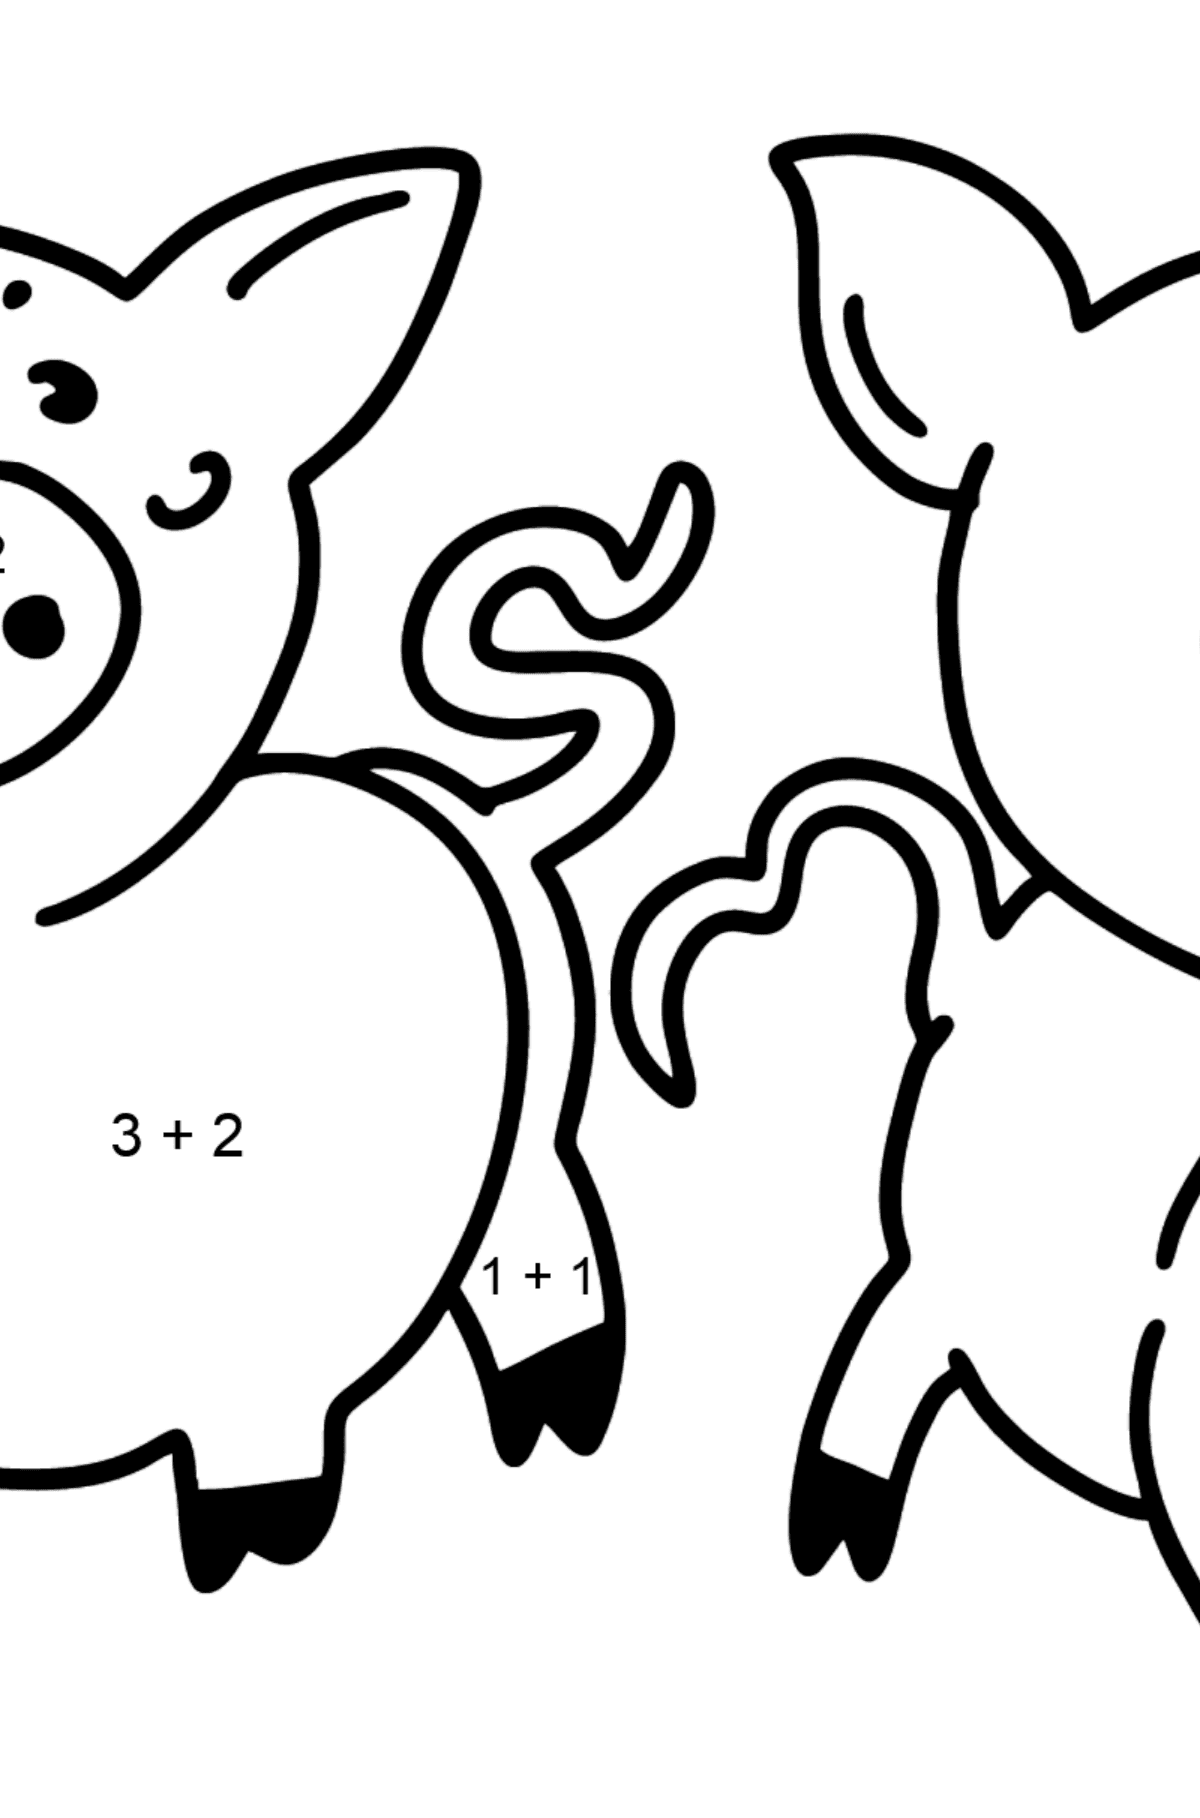 Piglets coloring page - Math Coloring - Addition for Kids